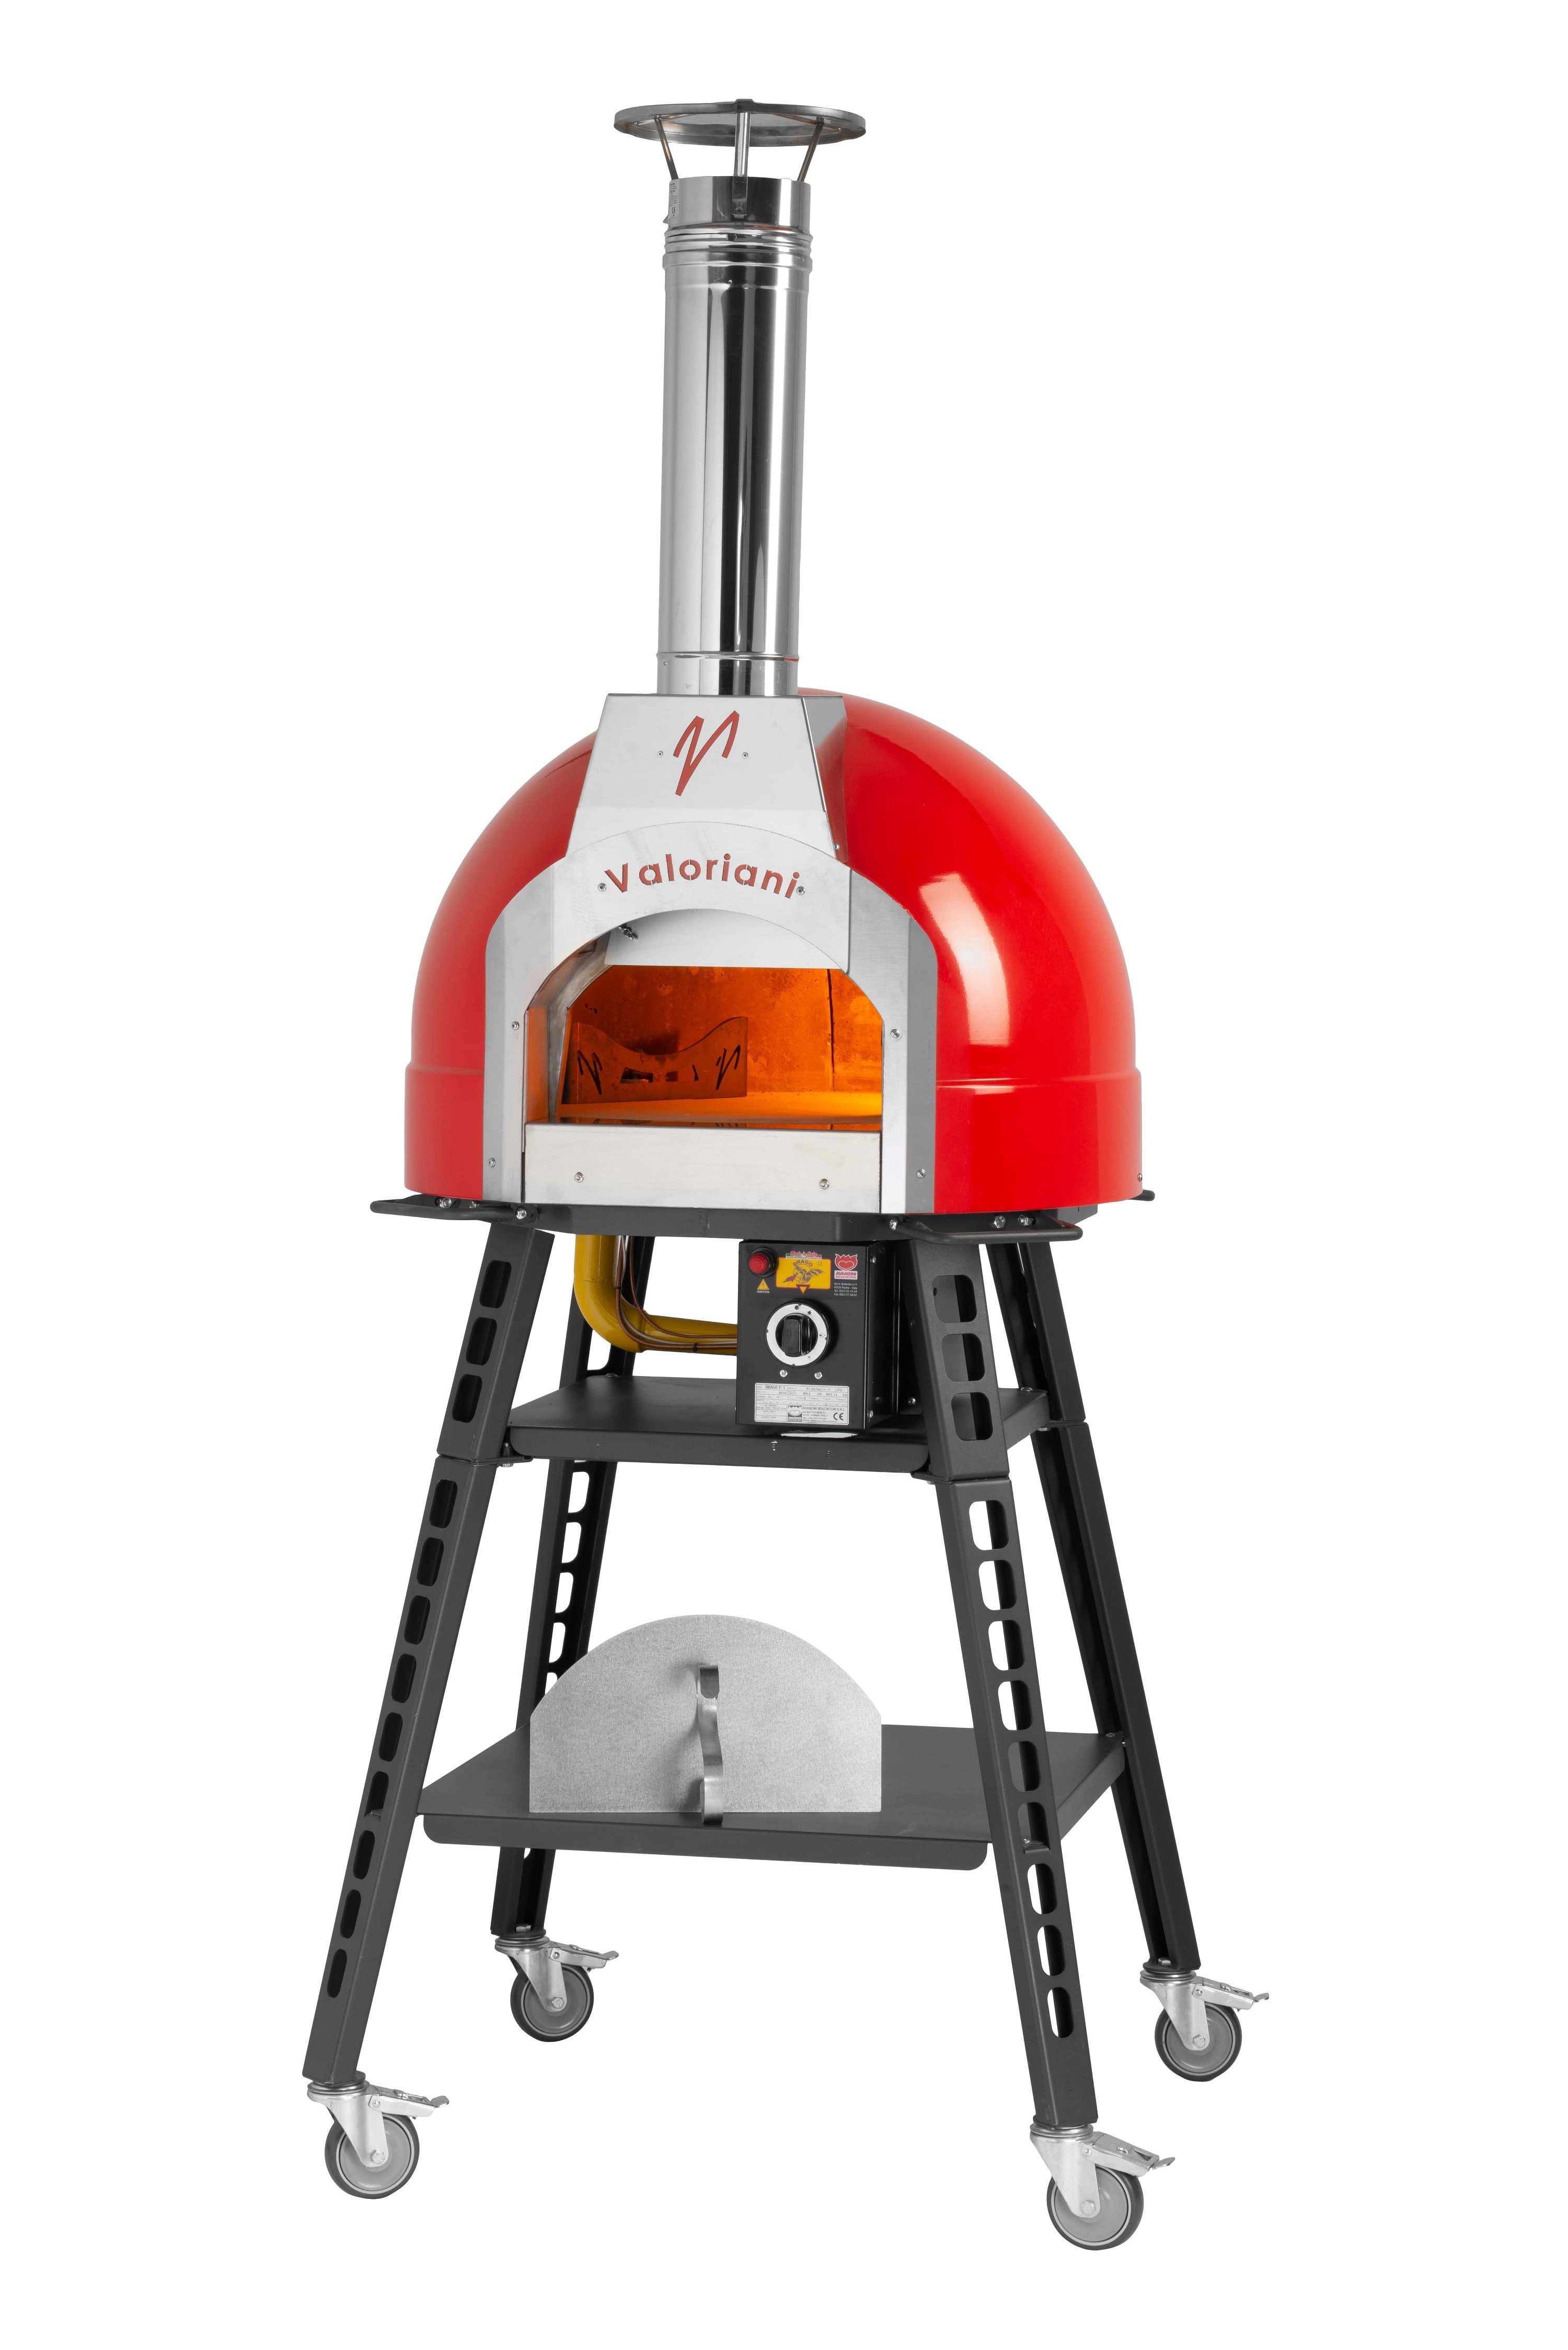 Valoriani Baby: pizza oven with gas firing and 60cmdiameter, incl. complete base, red.